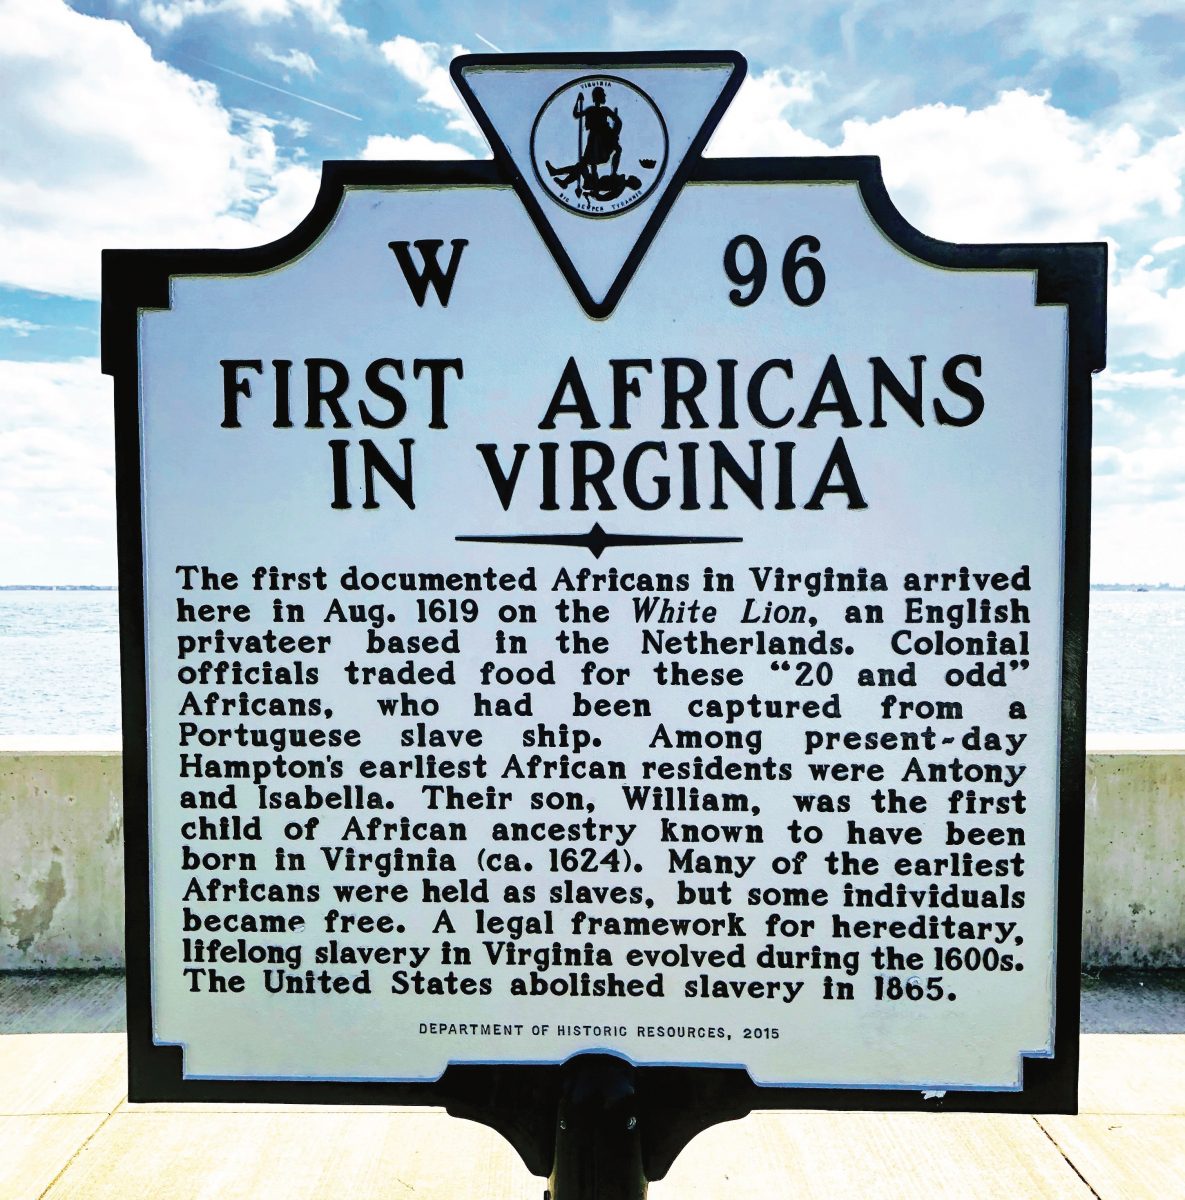 First Africans in Virginia